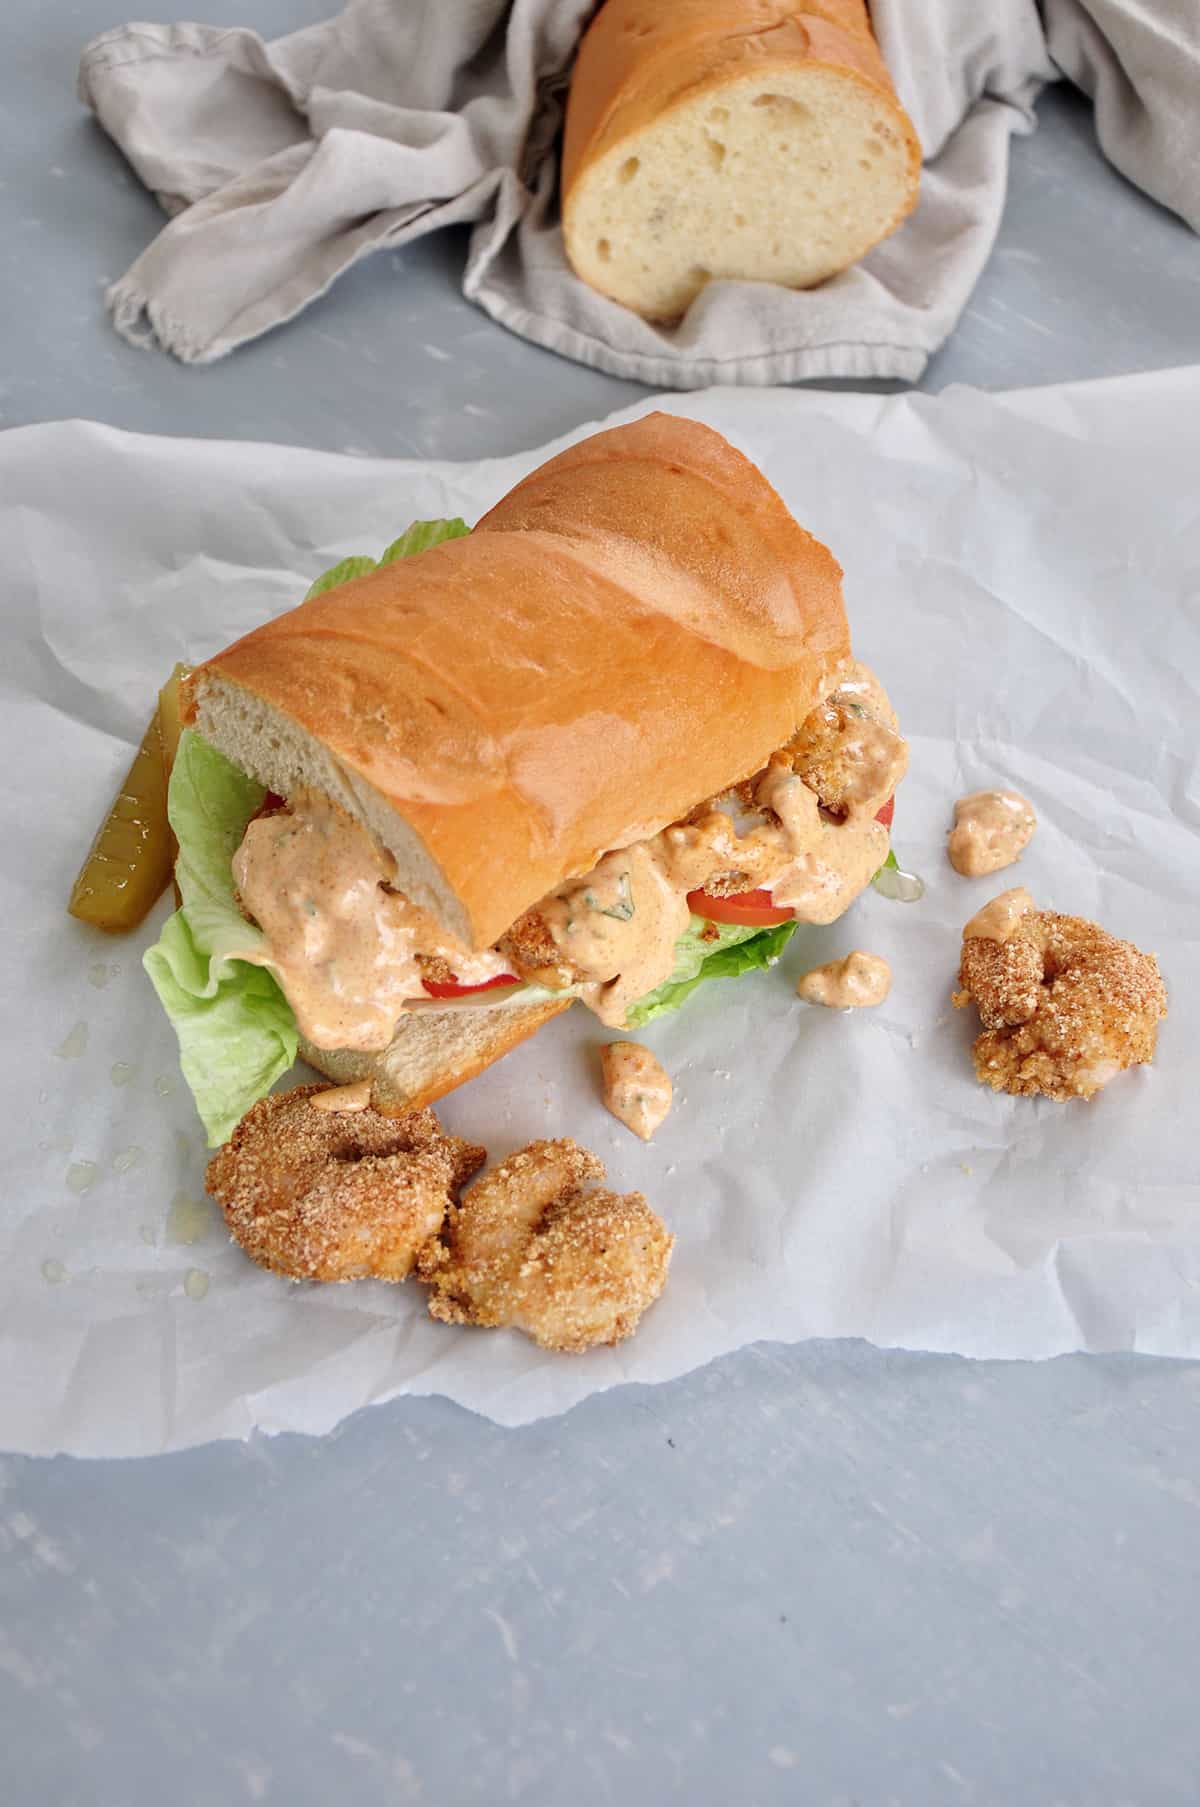 Finished po' boy sandwich with remoulade sauce on it. French bread in background wrapped in cloth.